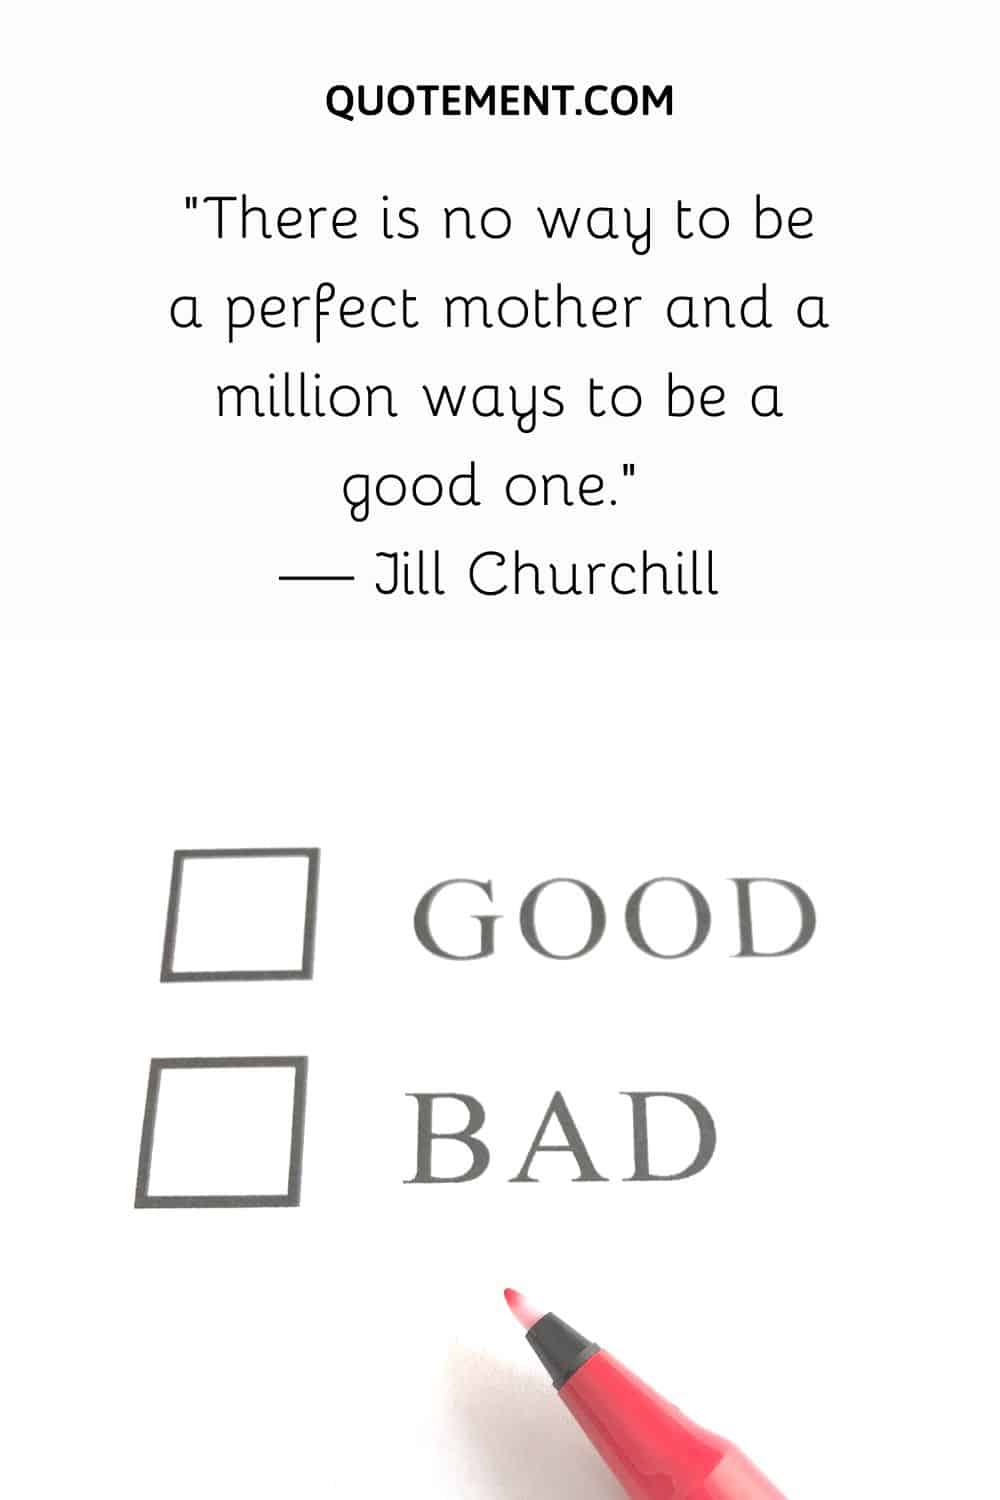 There is no way to be a perfect mother and a million ways to be a good one